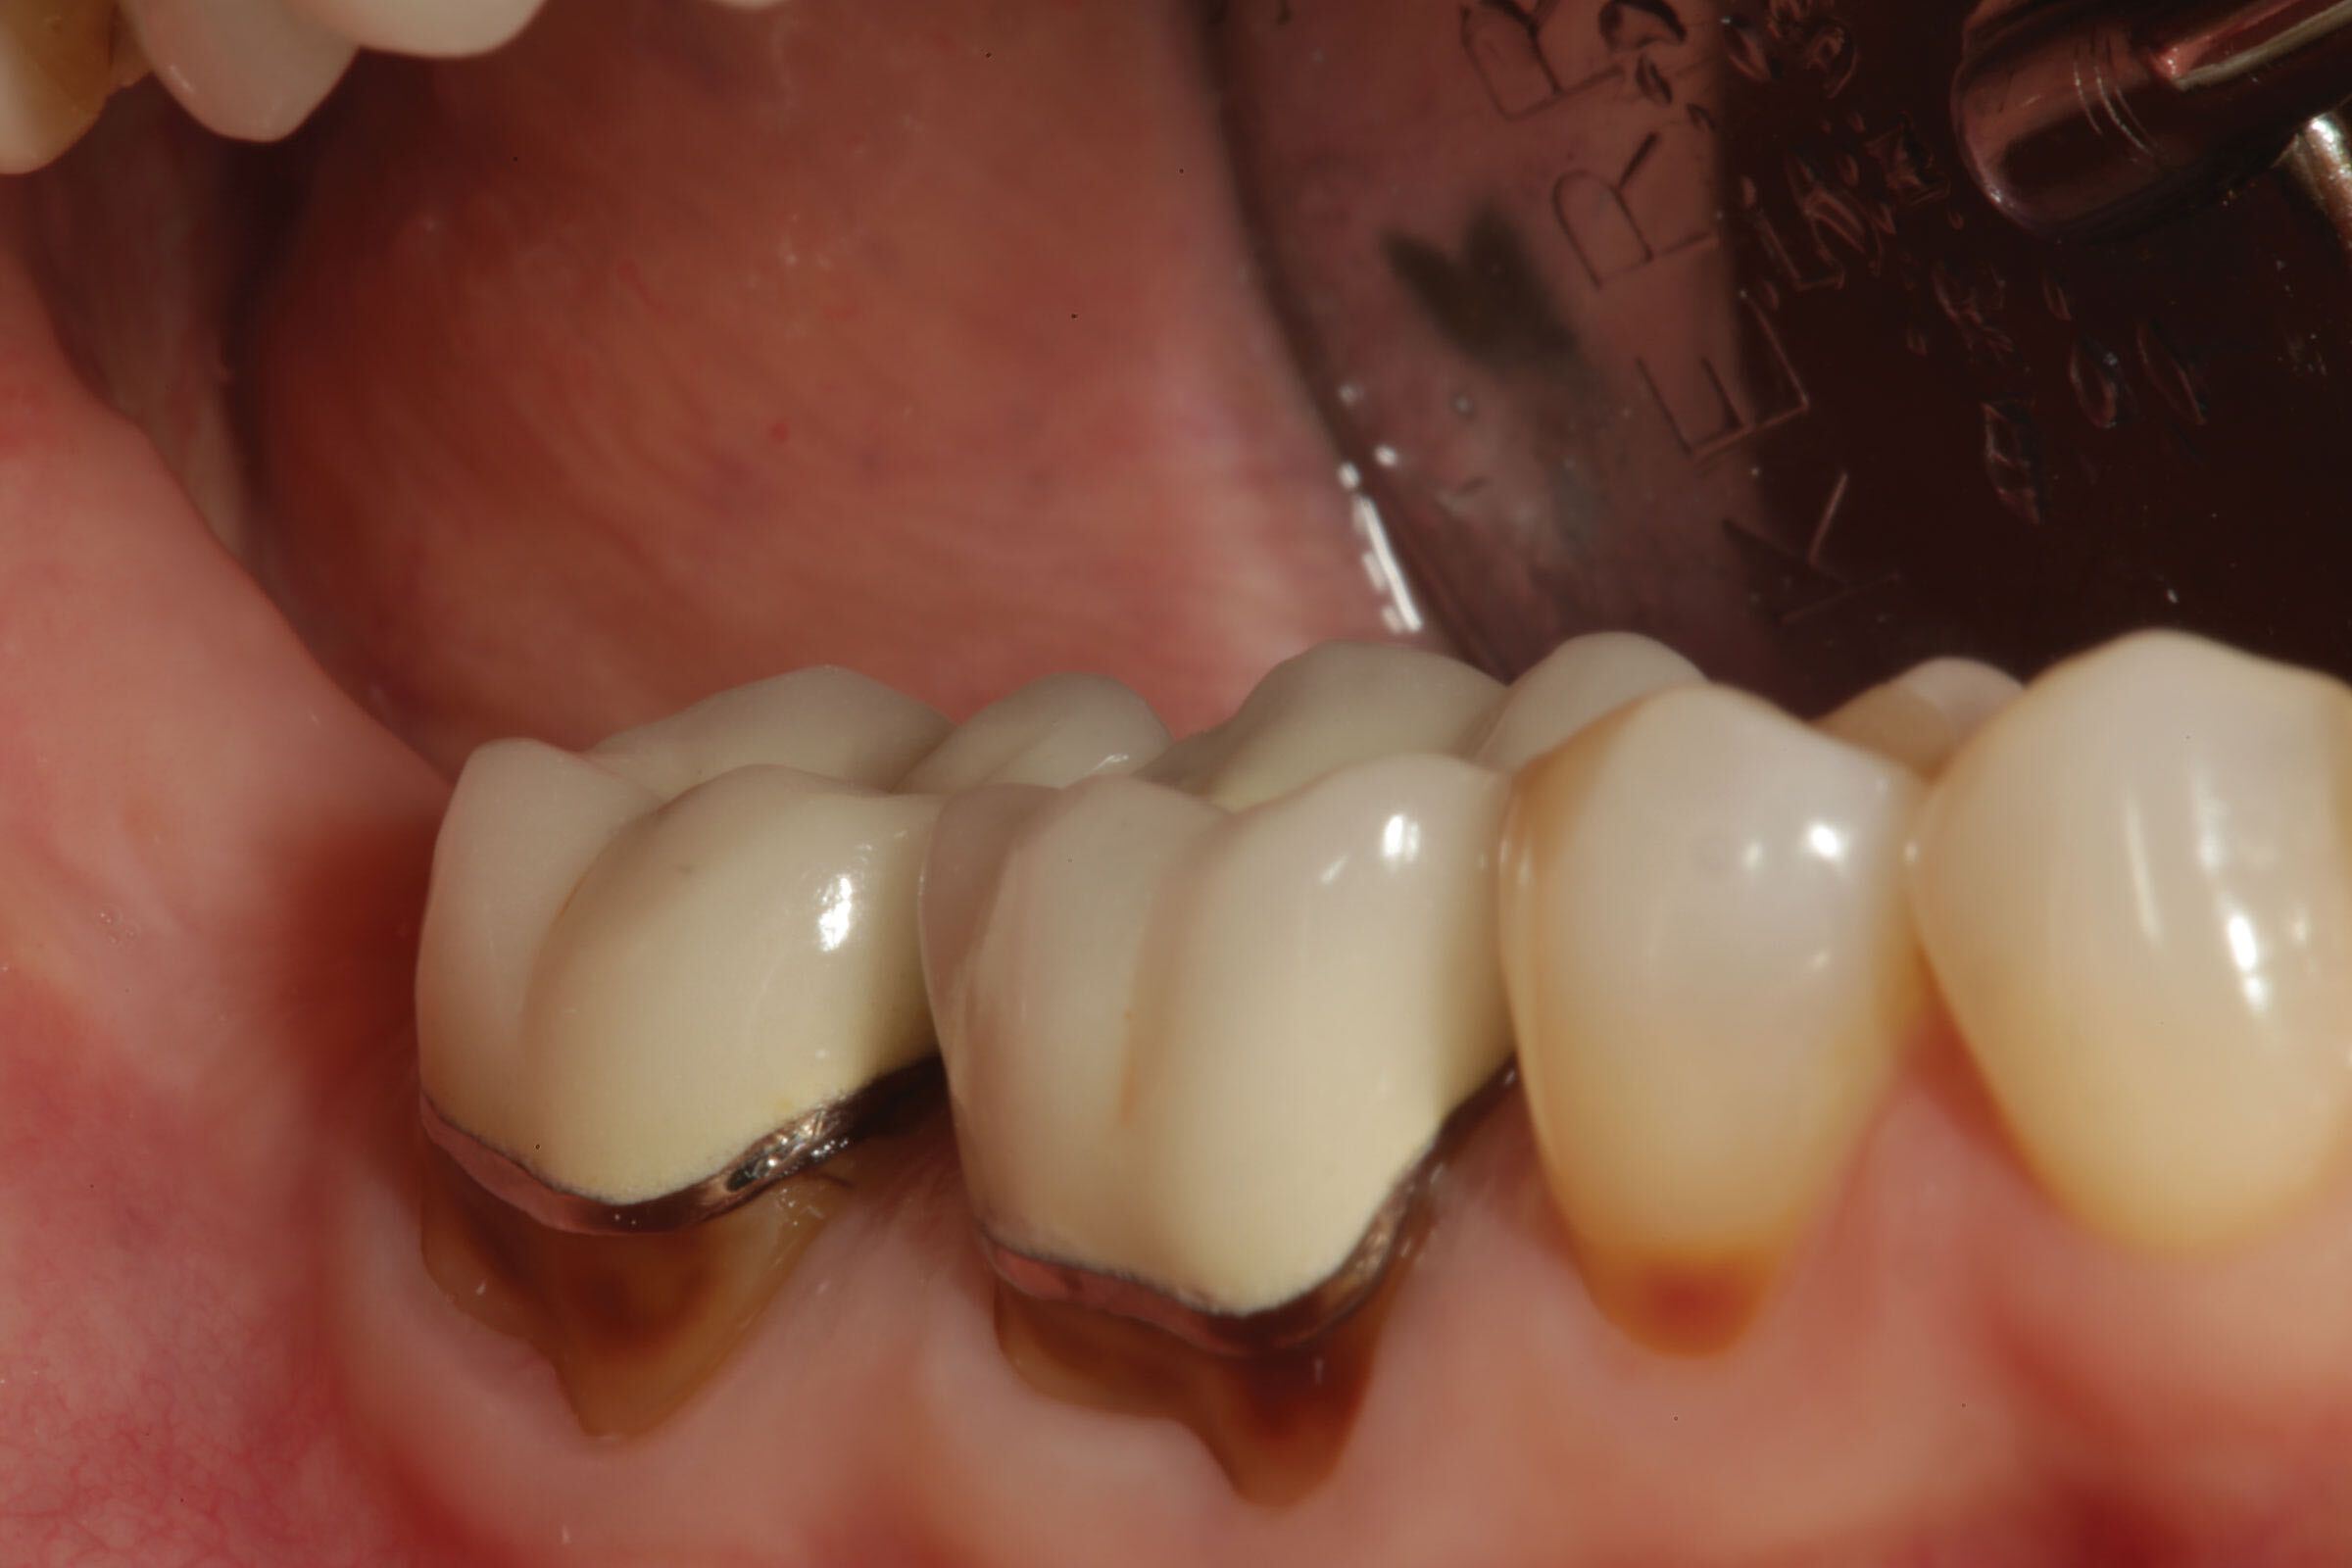 Dental Filling - How Long Does it Take to Fill a Cavity